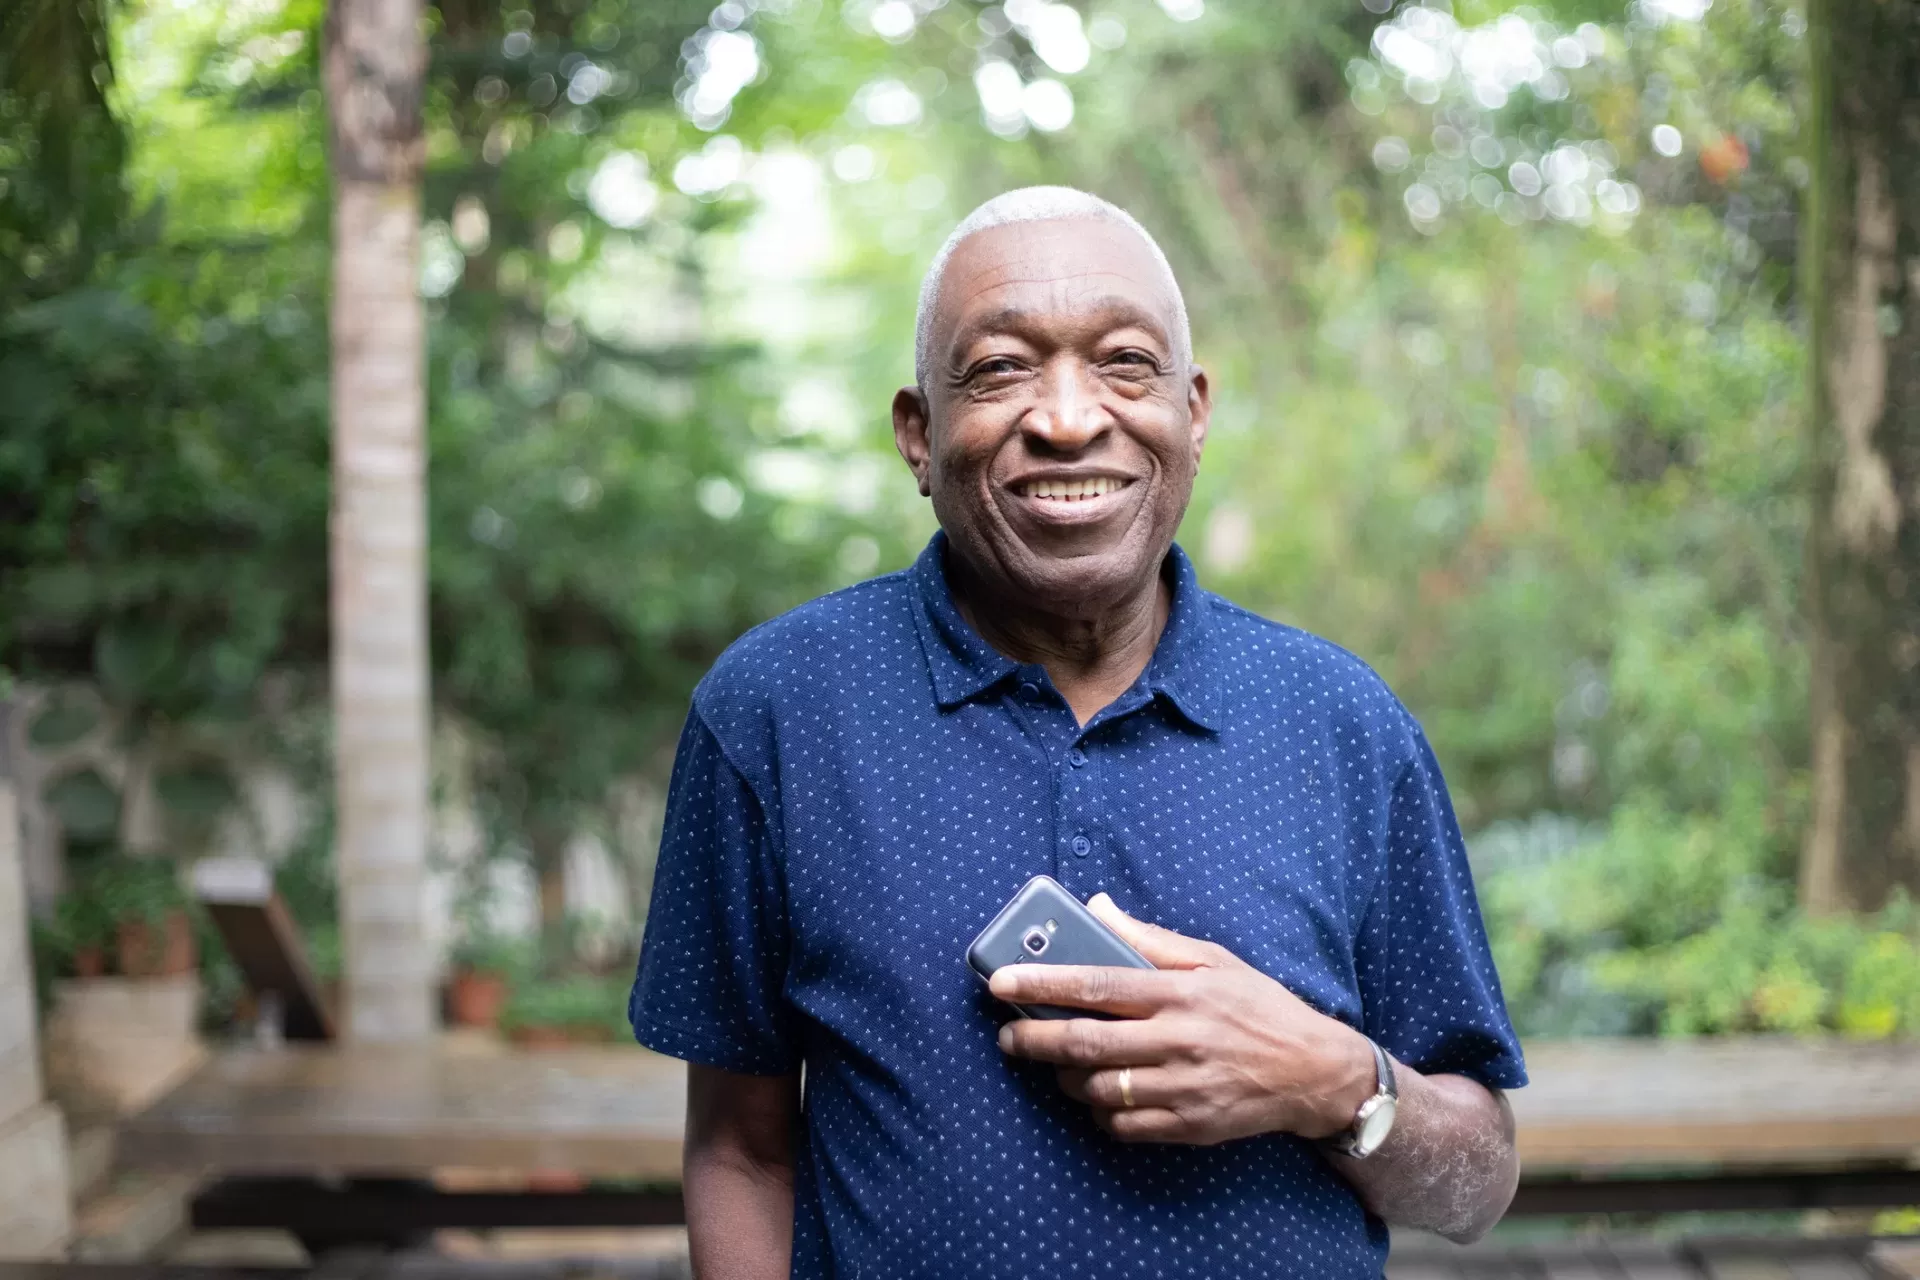 Smiling Elderly Man Holding A Mobile Phone